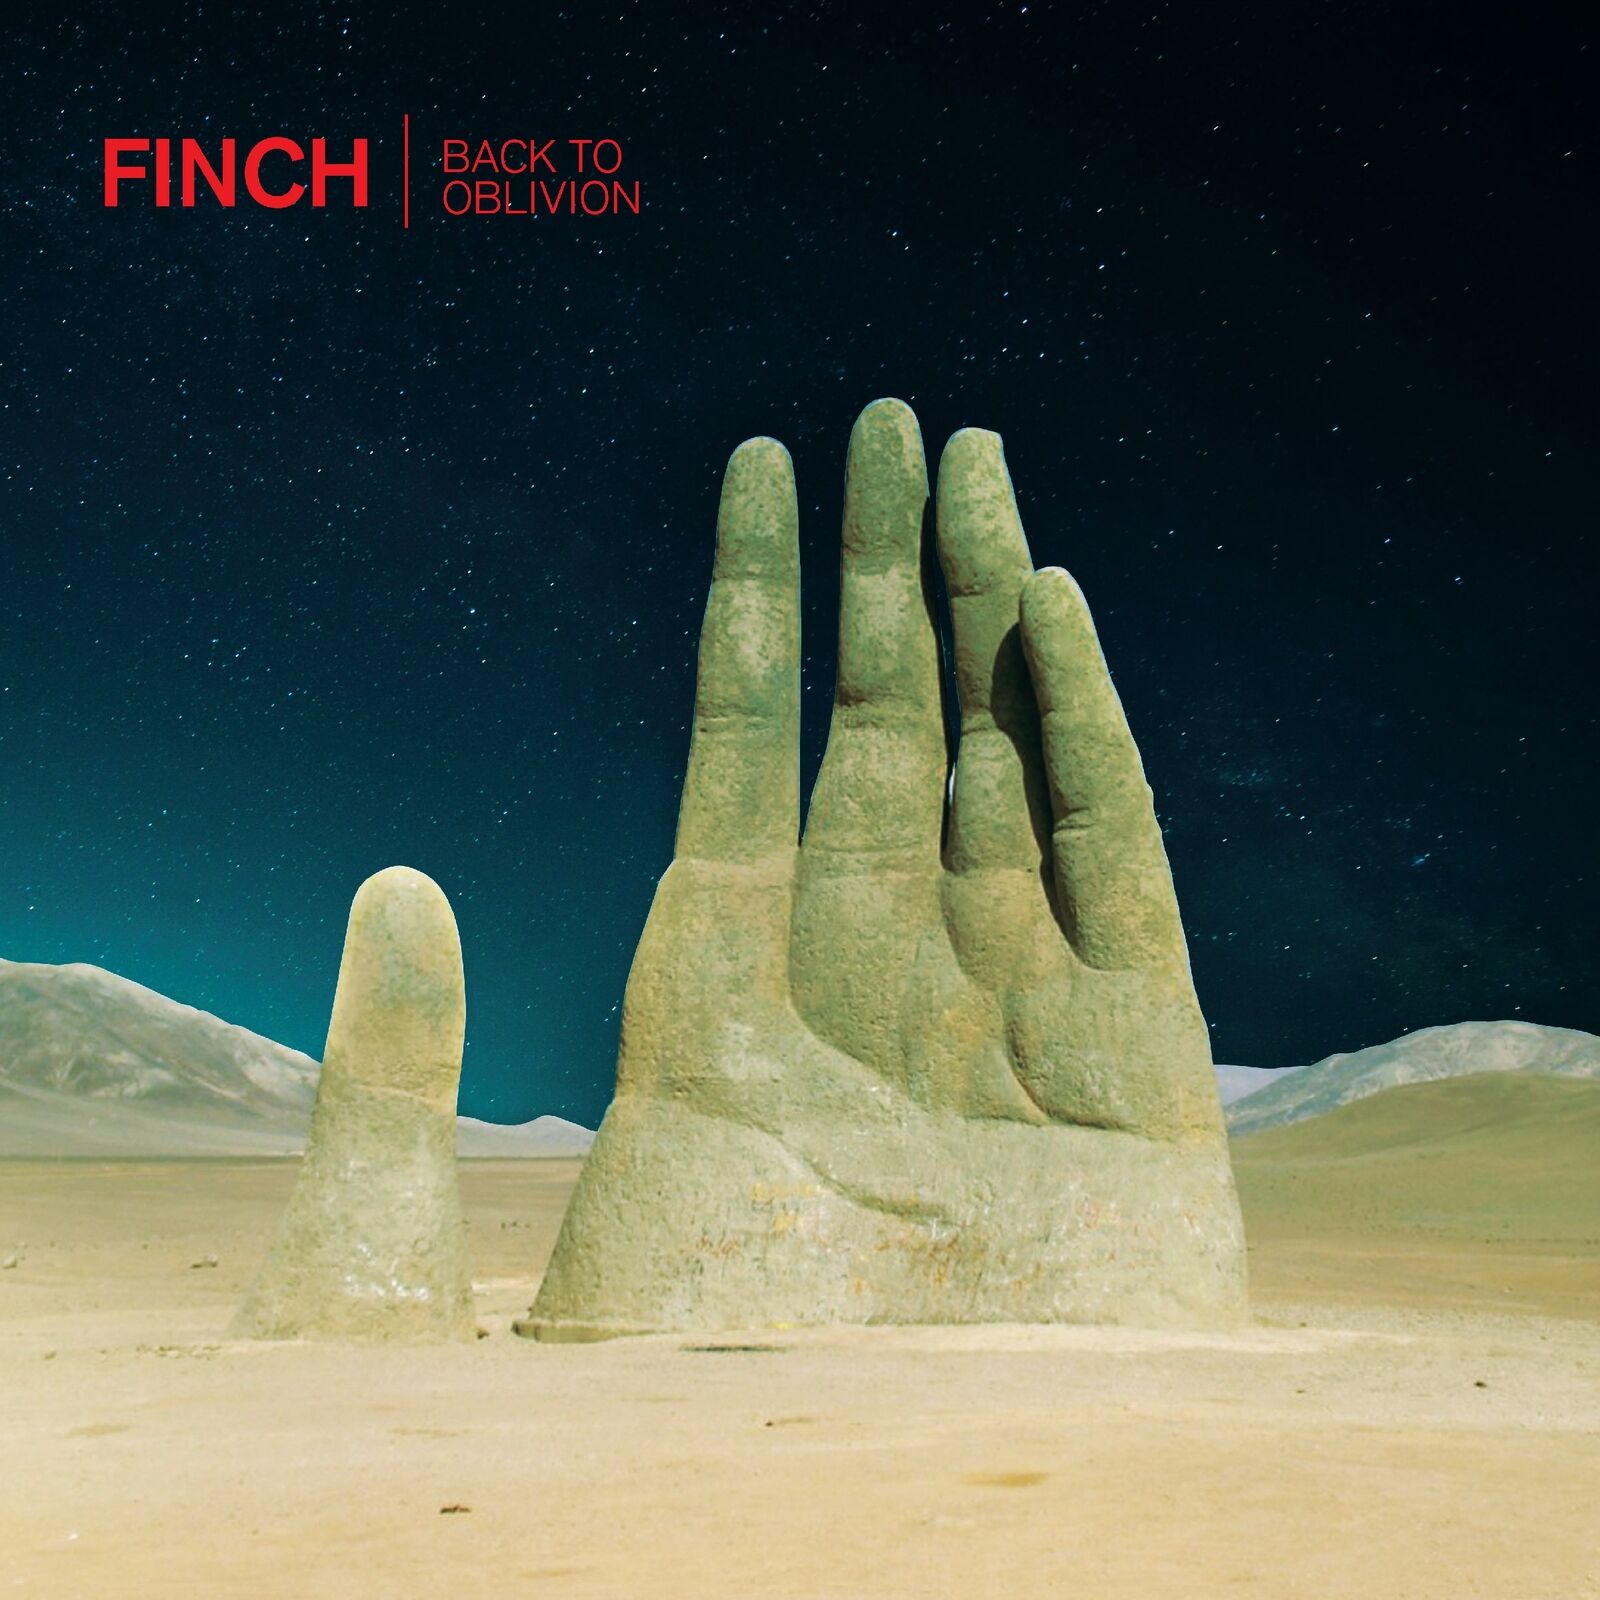 Back to Oblivion [CD] Finch [*READ* Ex-Lib. DISC-ONLY]